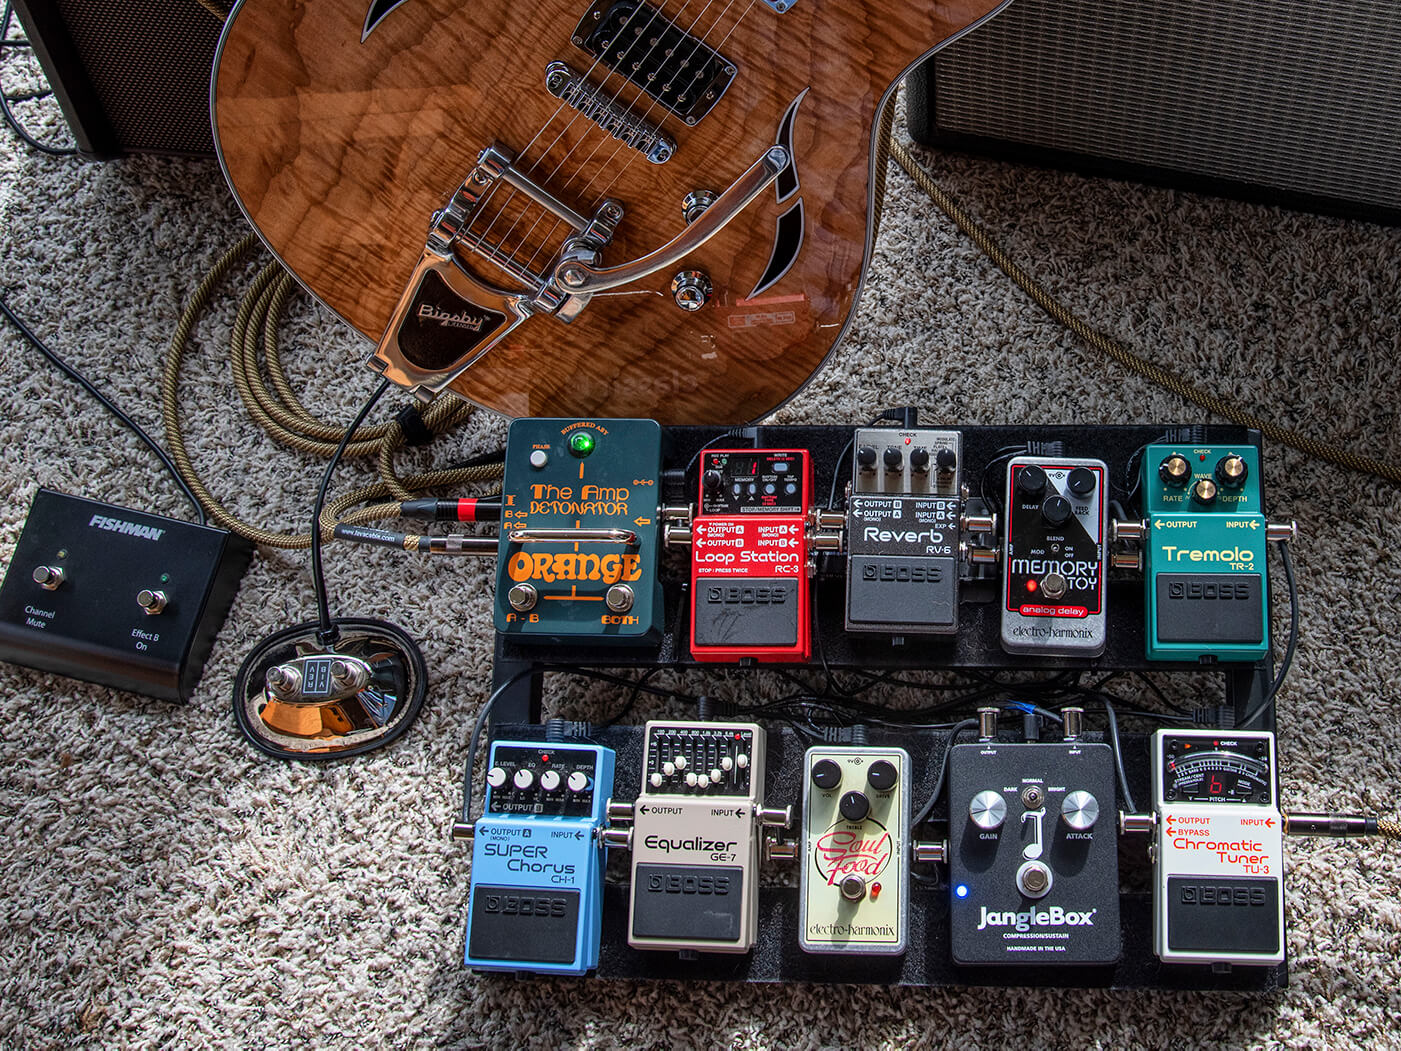 Zichzelf Mainstream Jabeth Wilson Your Board: Mitchell Strauss' rig for country blues